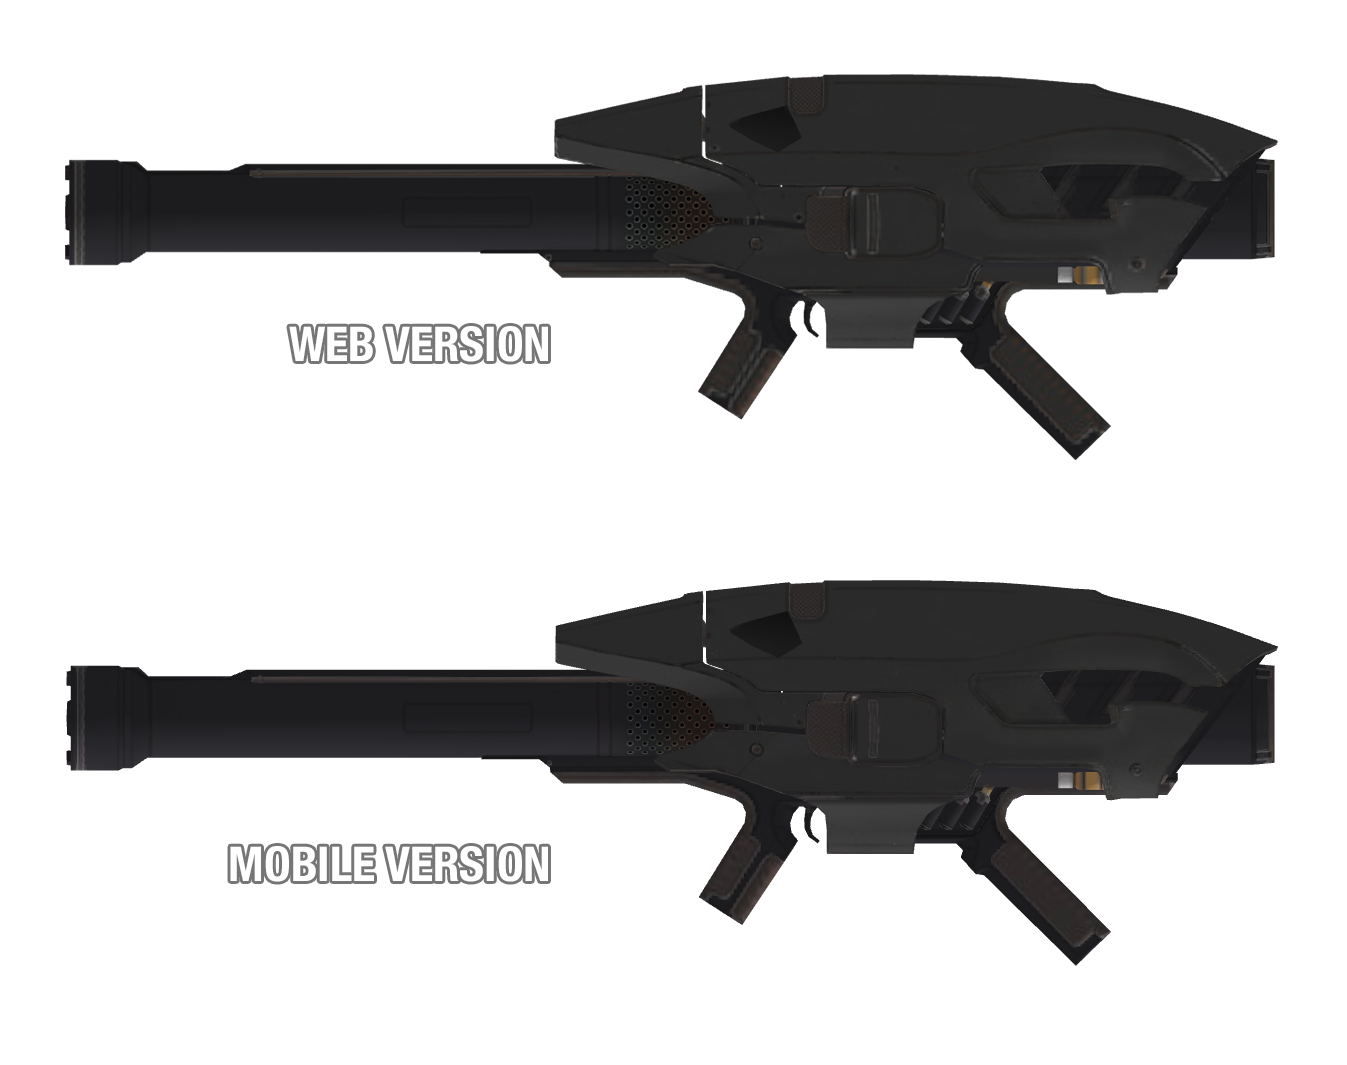 Comparison of the texture quality between the mobile and web versions.